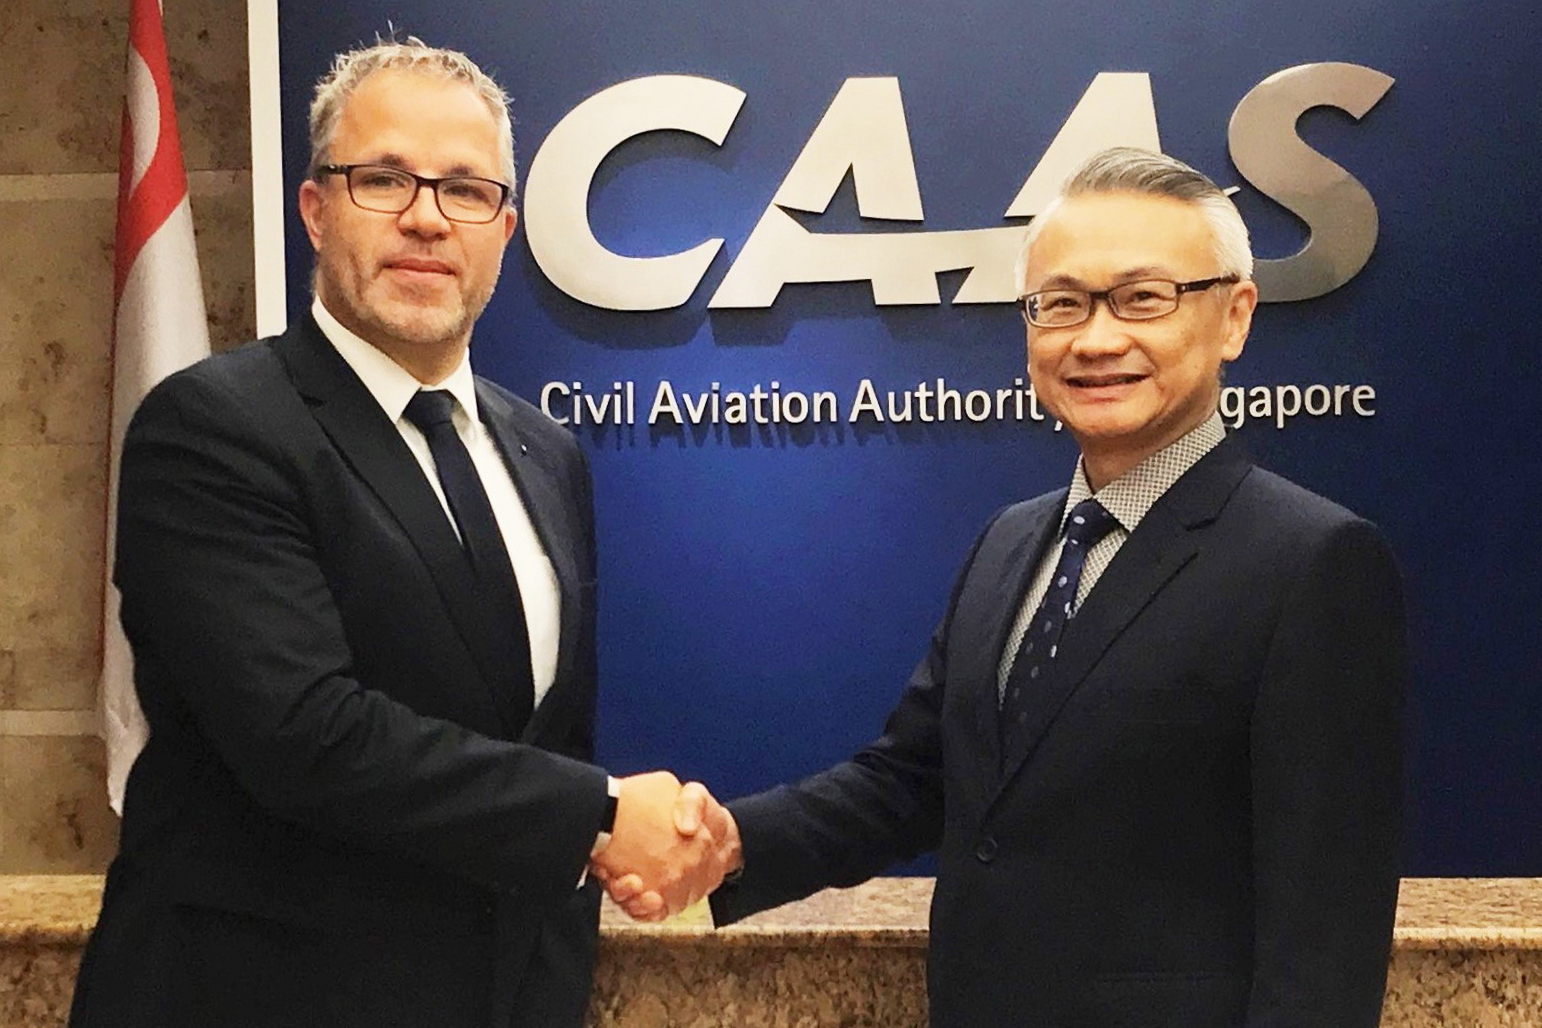 The MoU was signed by Soh Poh Theen, Deputy Director-General (Air Navigation Services) of CAAS, as well as Oliver Cristinetti and Dirk Mahns, Managing Directors of DFS Aviation Services. Click to enlarge.